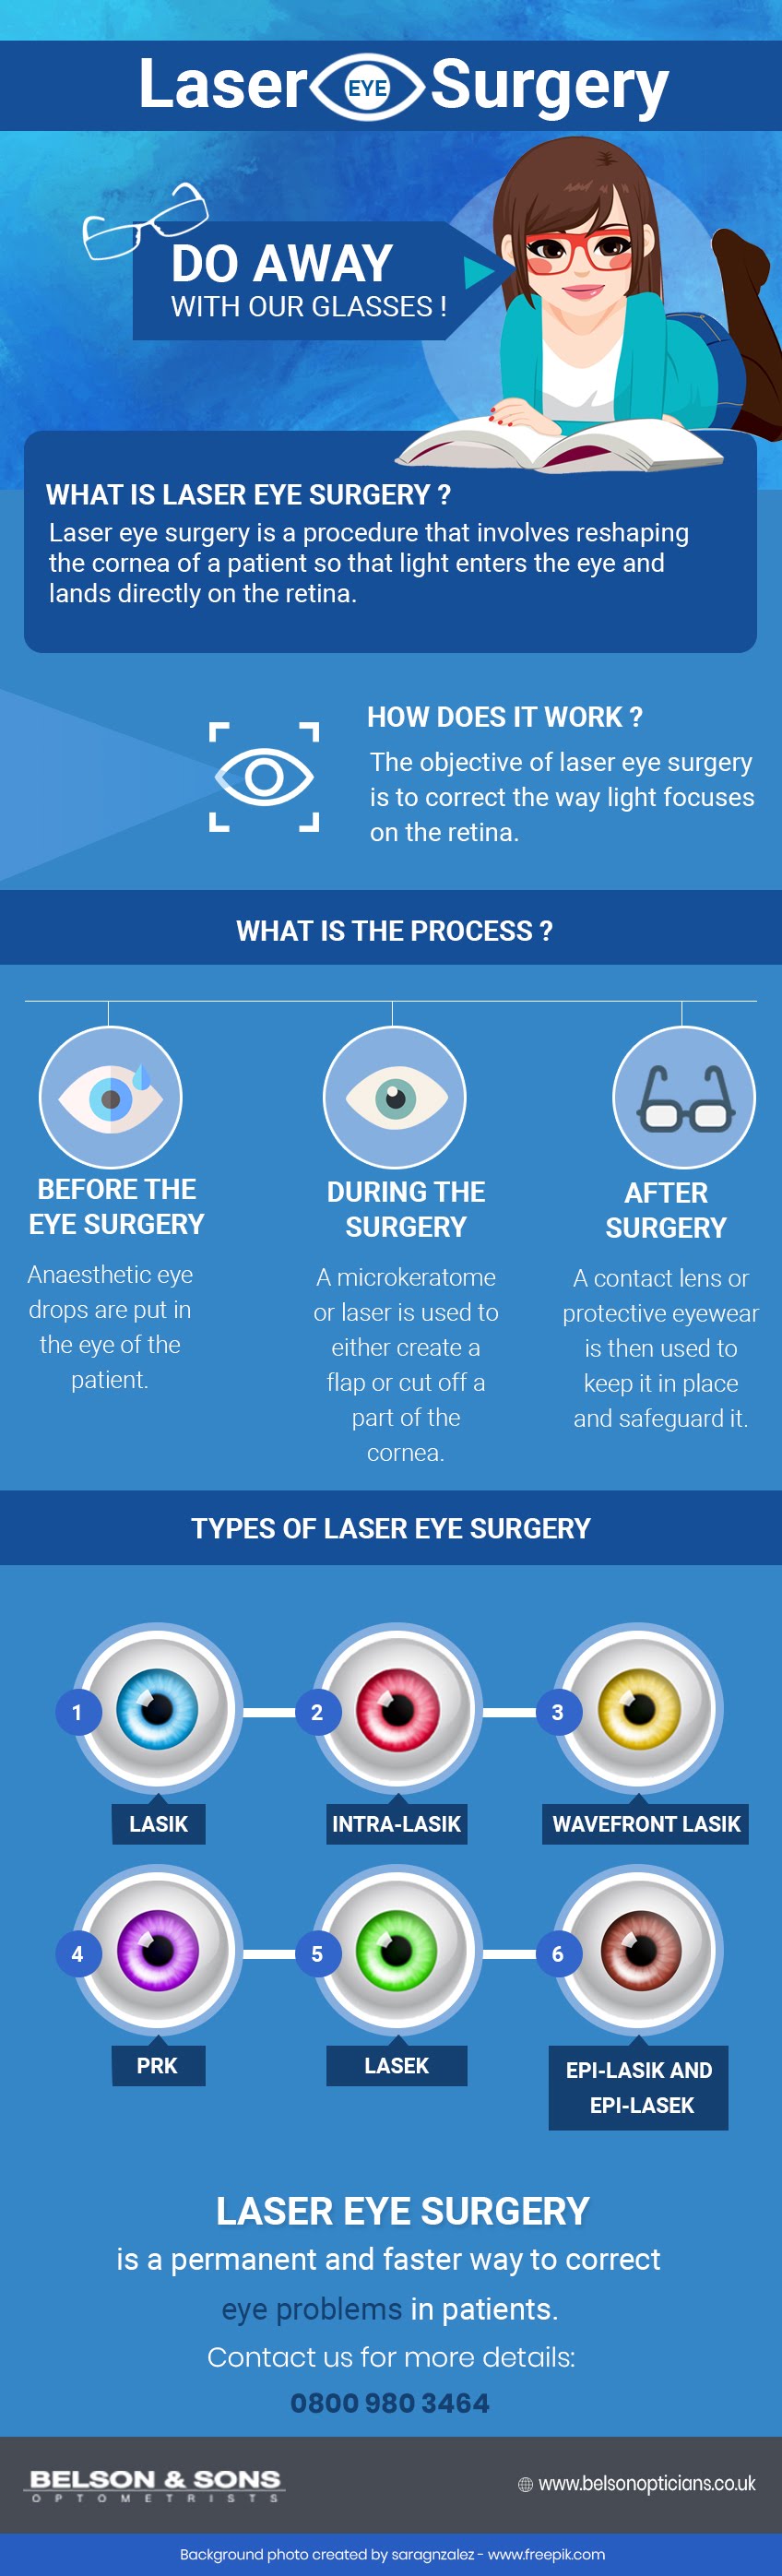 What Is Laser Eye Surgery? How Does It Work? #infographic